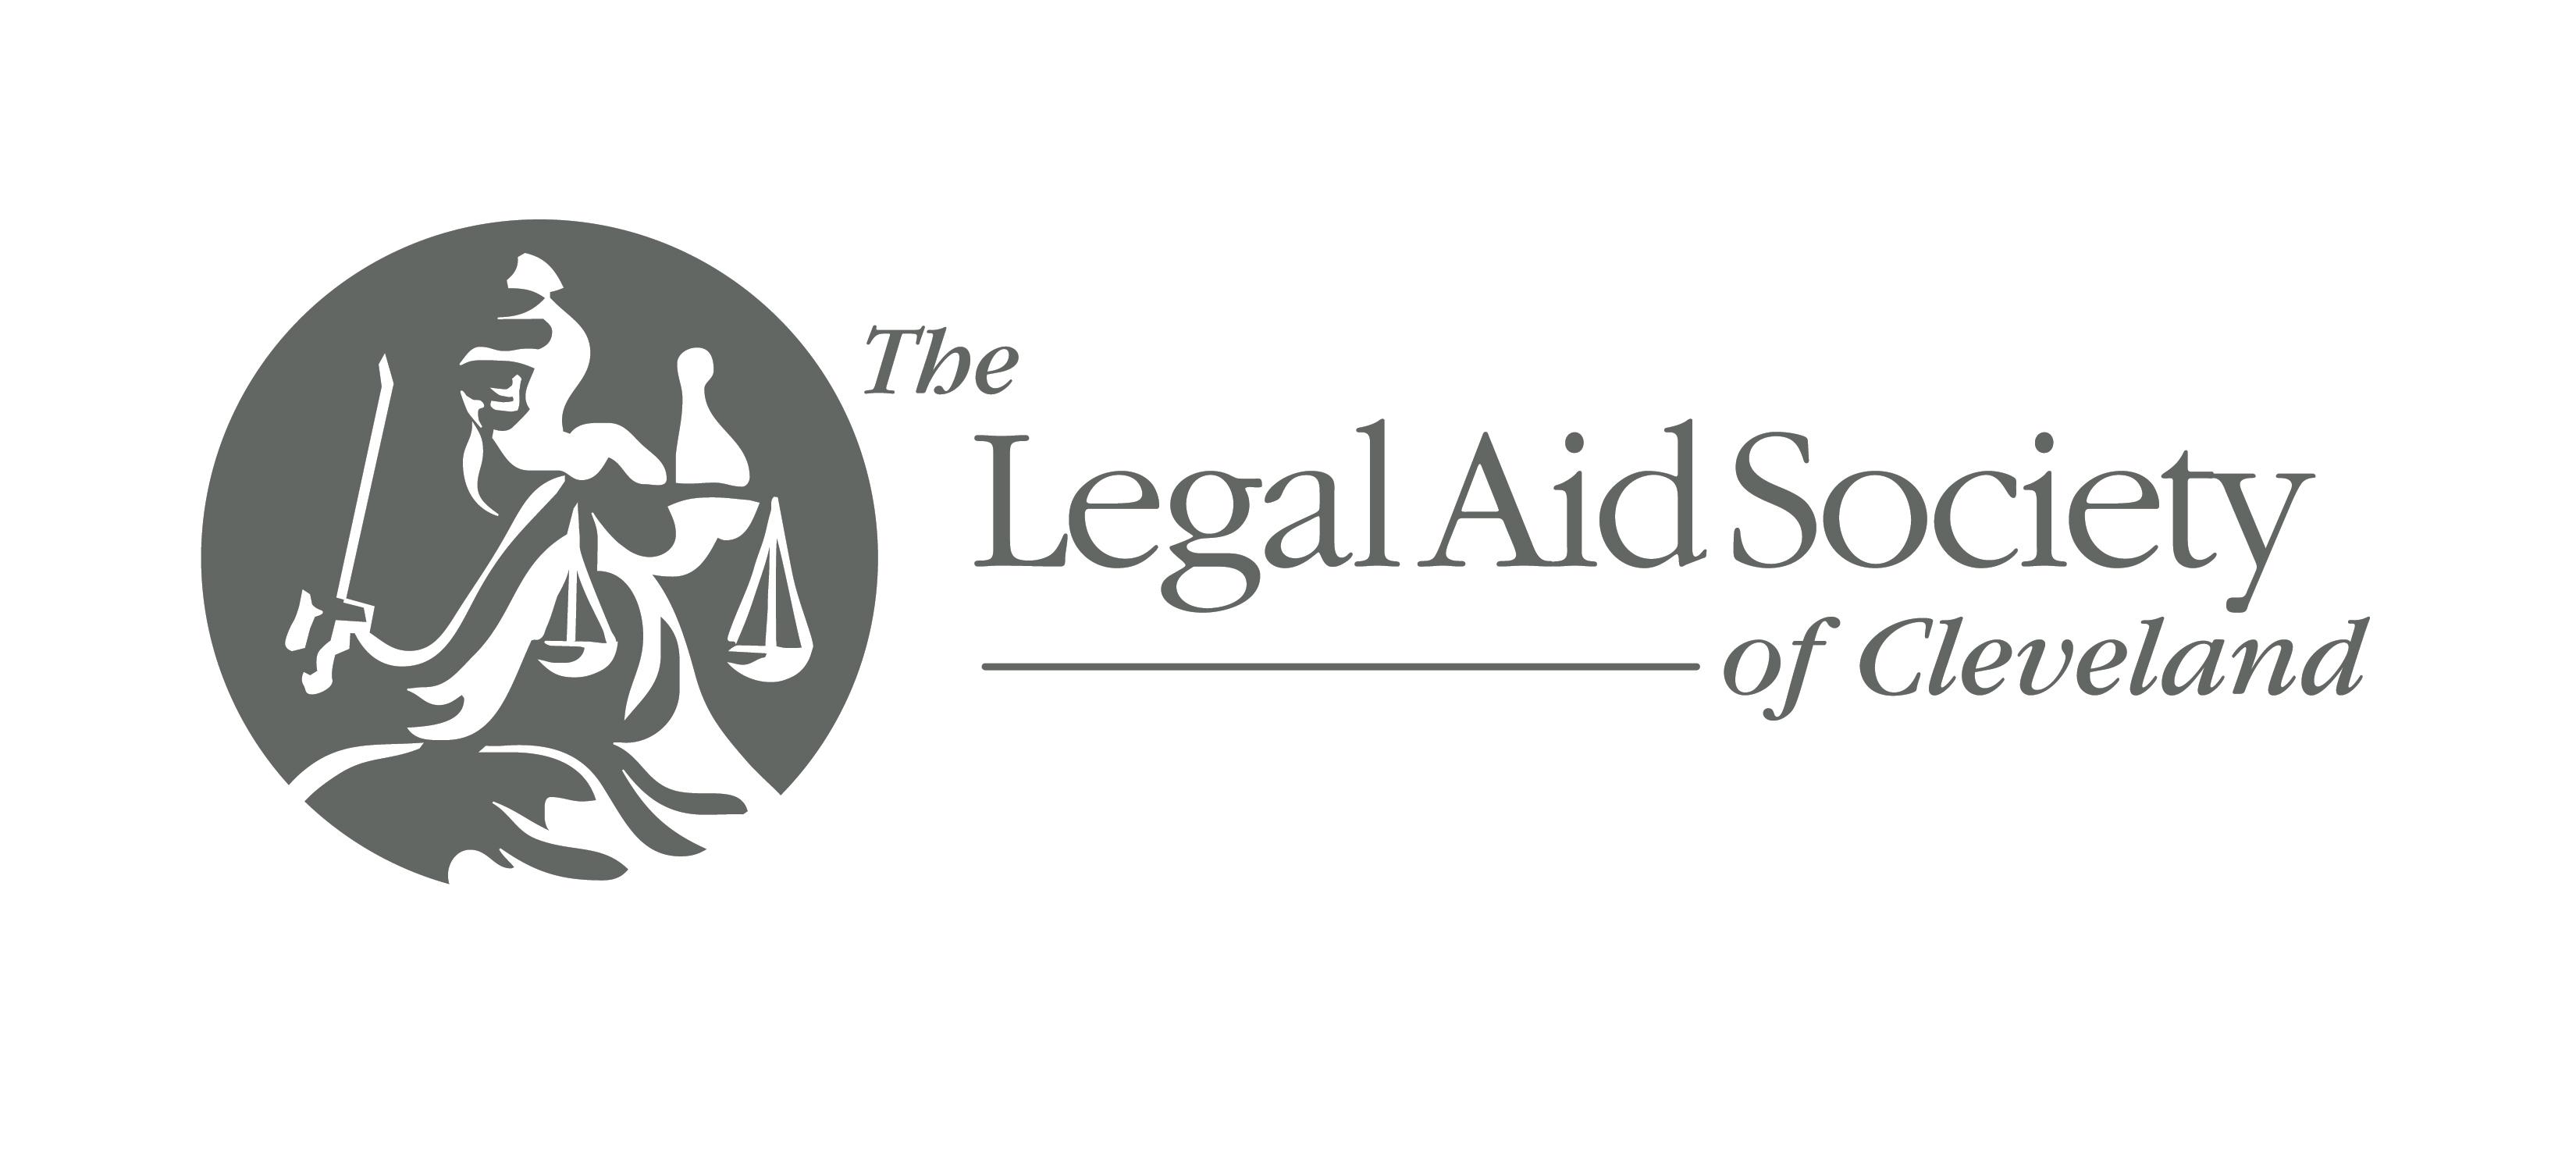 Legal Aid Society of Cleveland, The